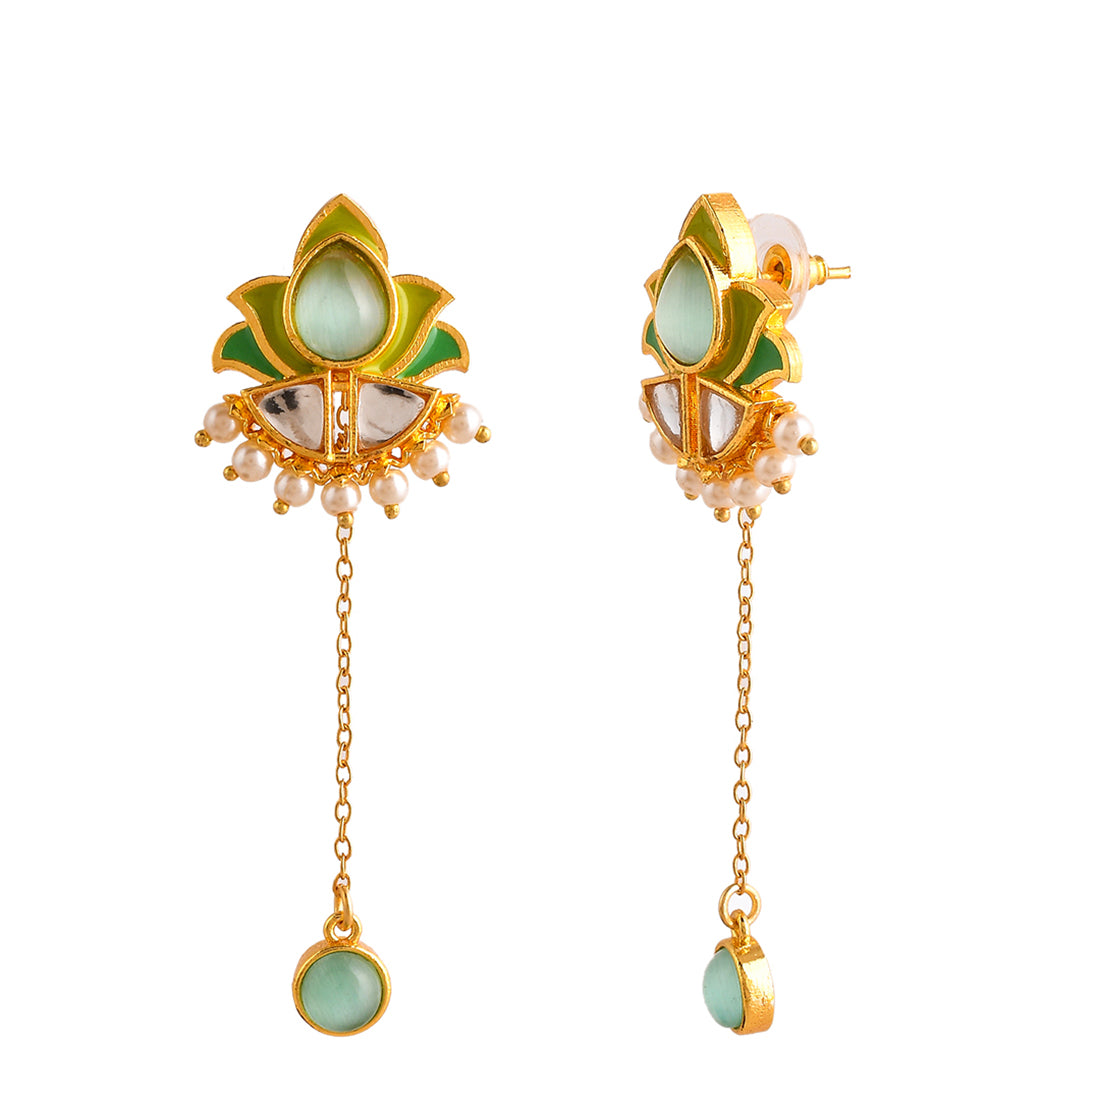 Forever More Green Stones and Pearls Enamelled Drop Earrings